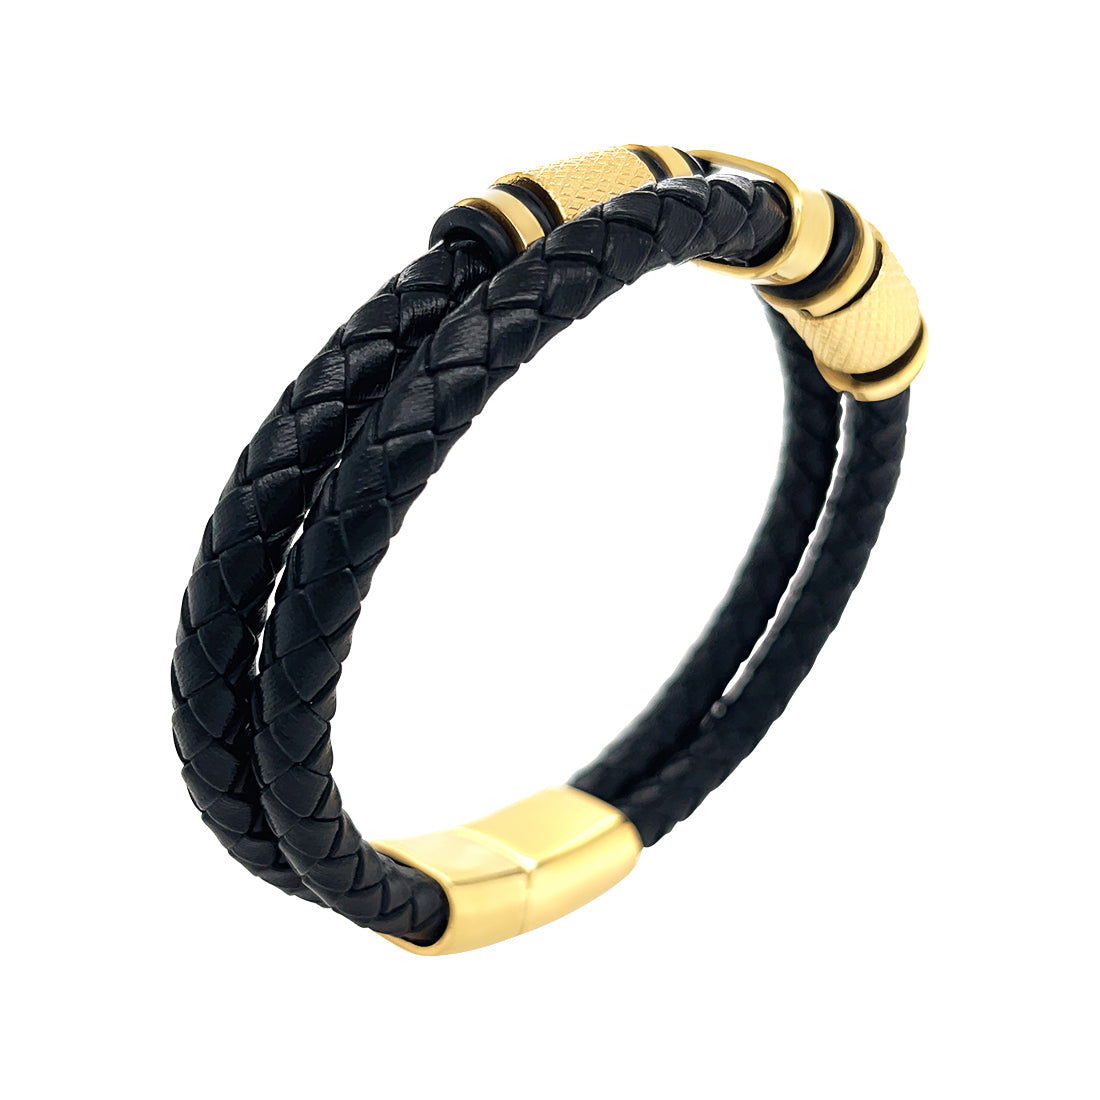 Yellow Stainless Steel and Leather Bracelet Bracelets Bevilles 